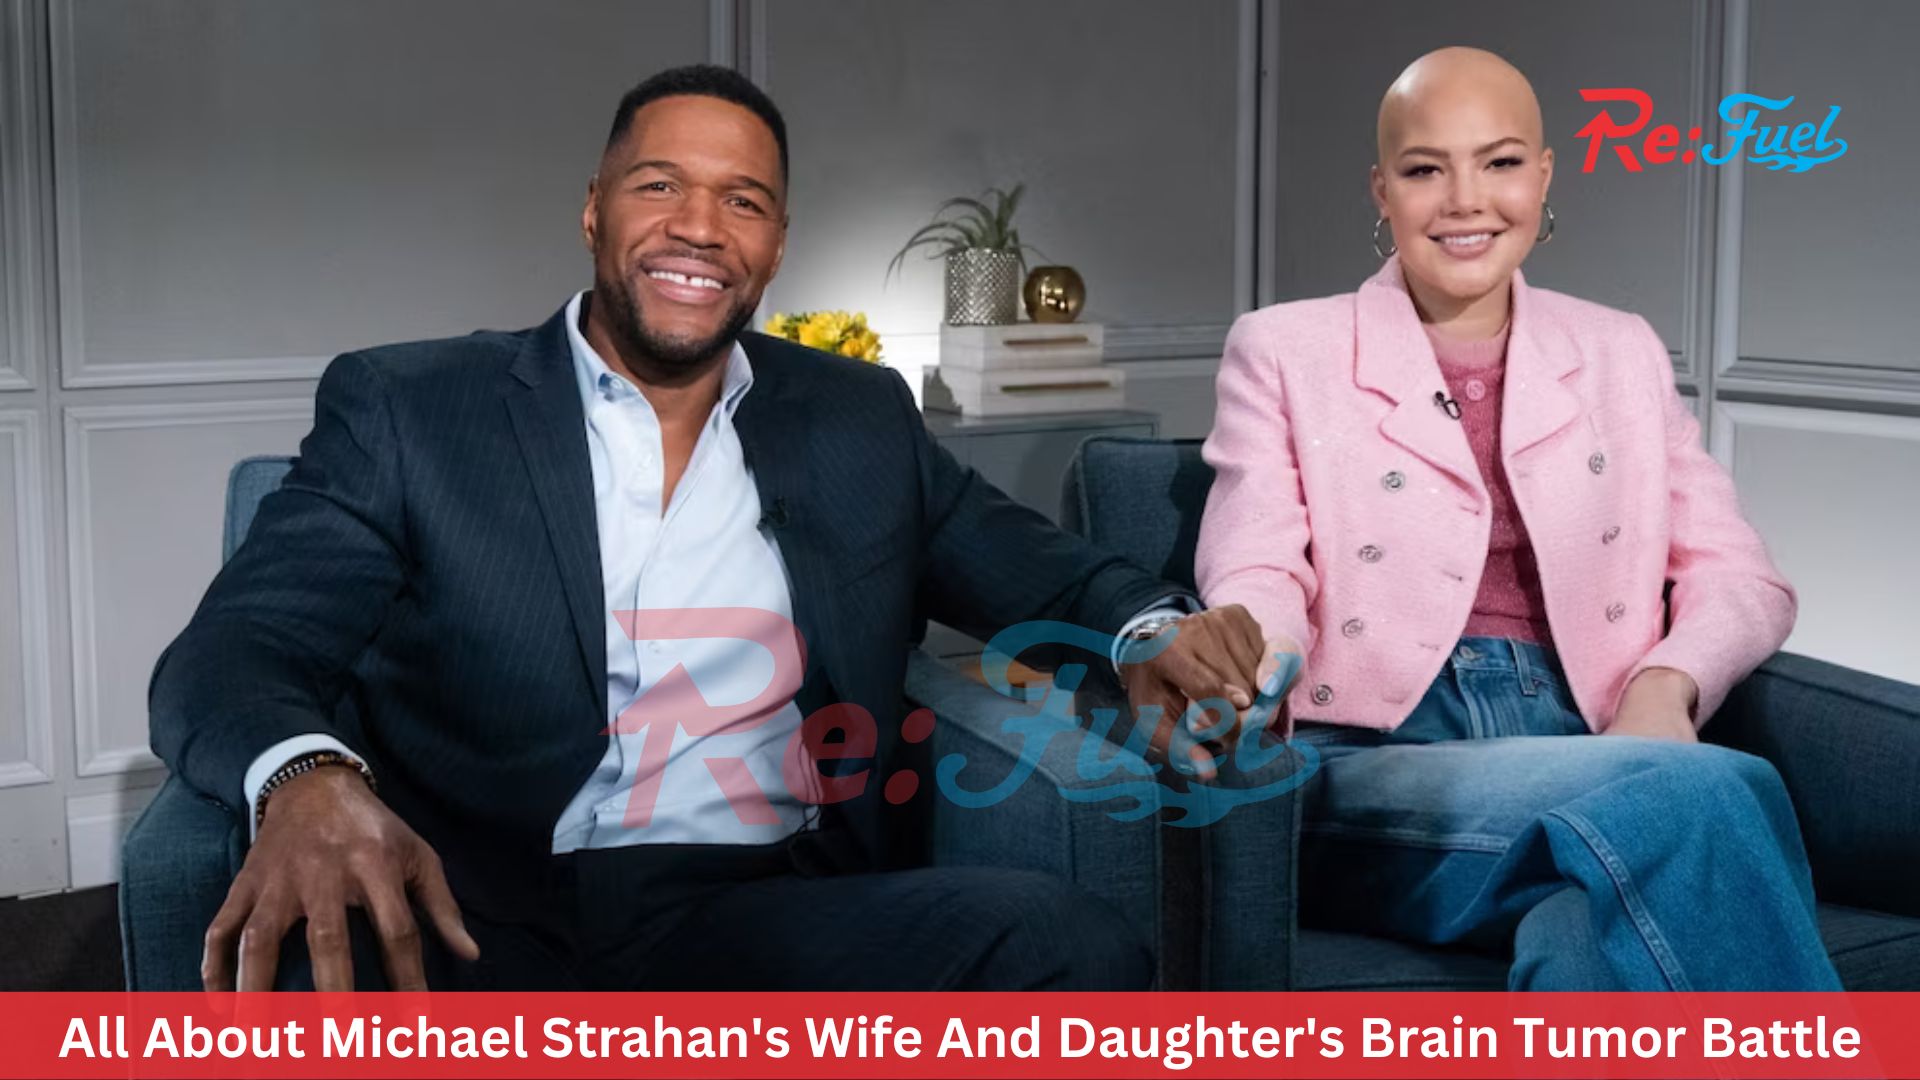 All About Michael Strahan's Wife And Daughter's Brain Tumor Battle